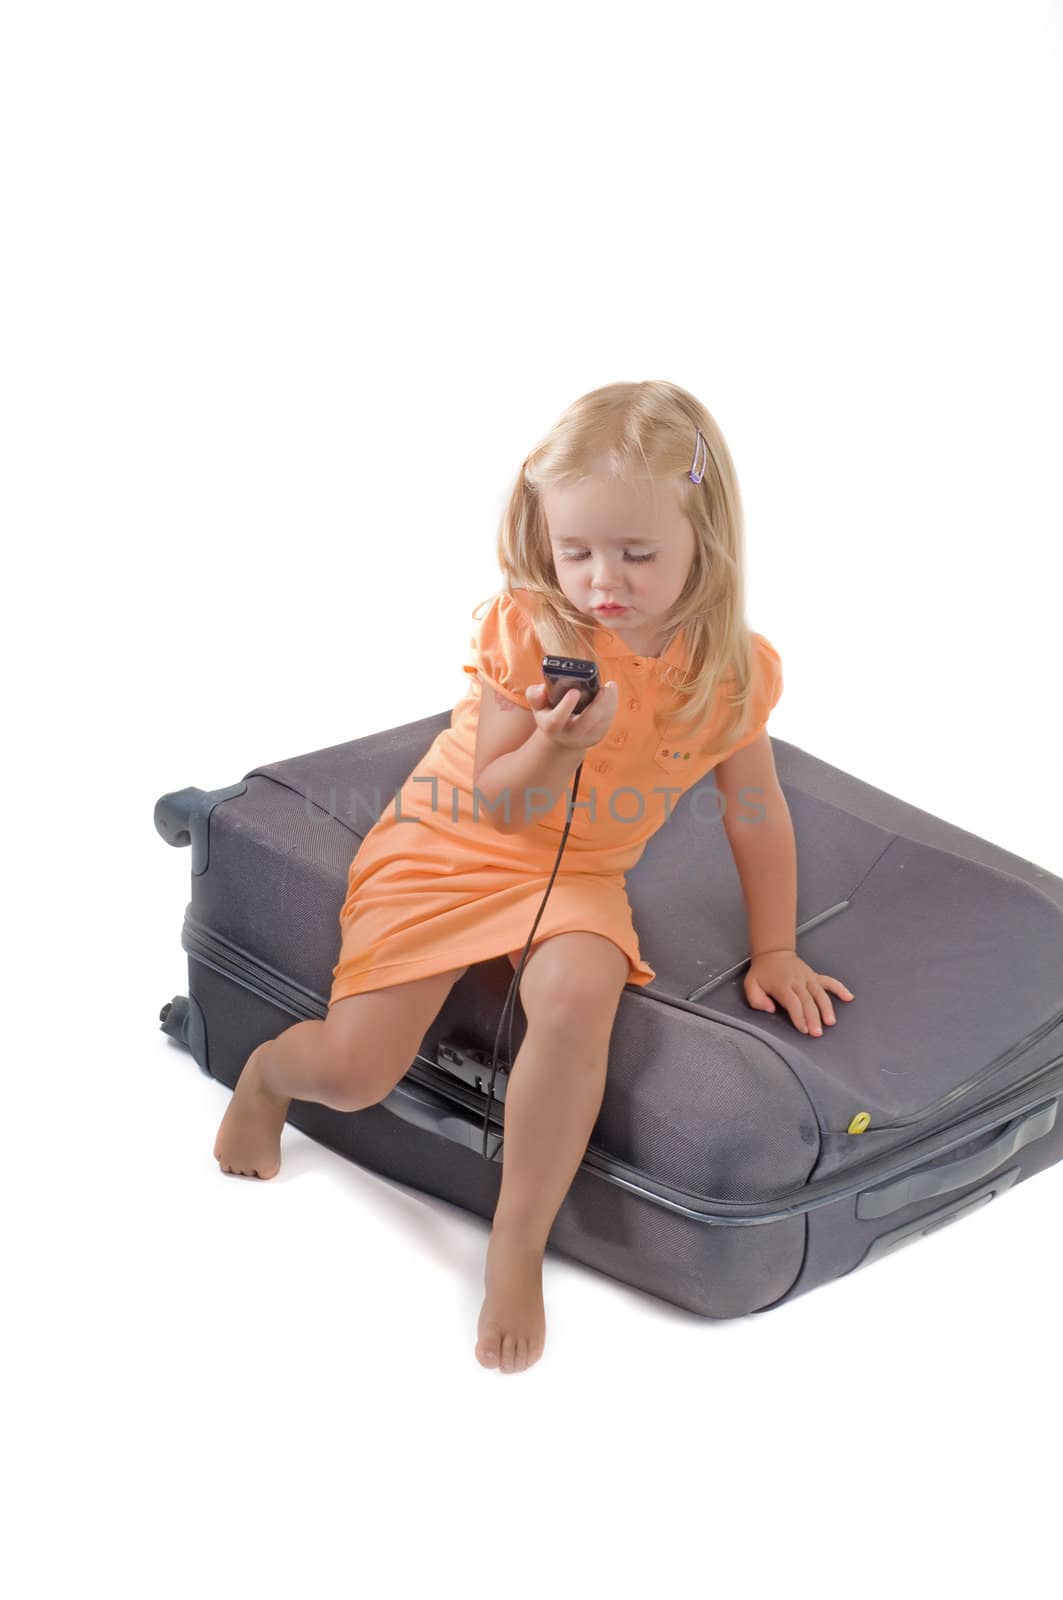 Shot of little girl and suitcase in studio